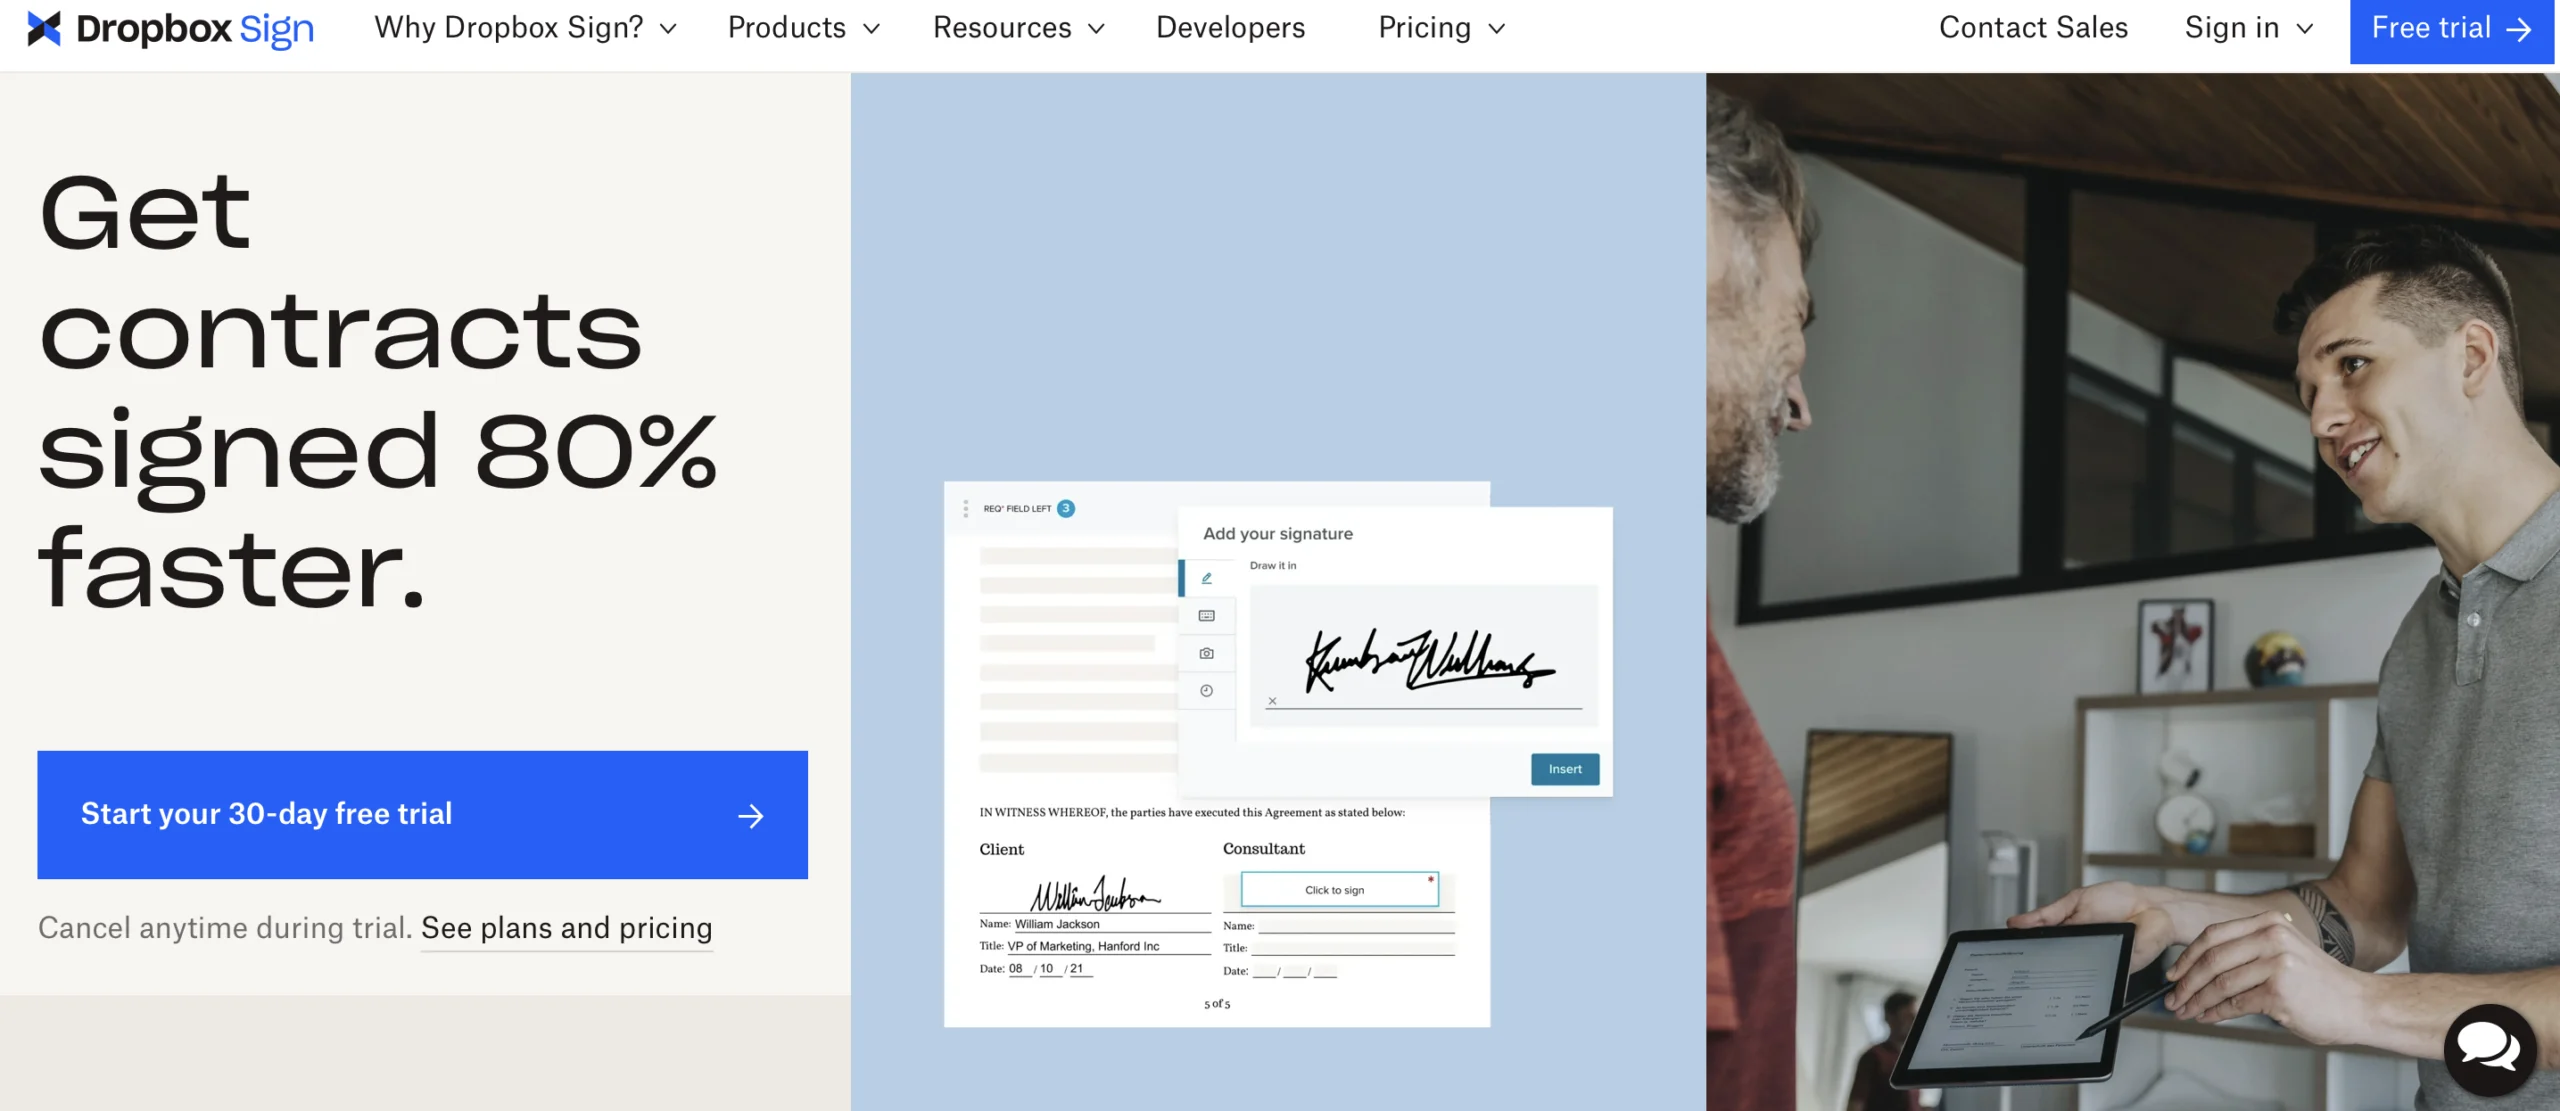 dropbox landing page showing a person signing a document